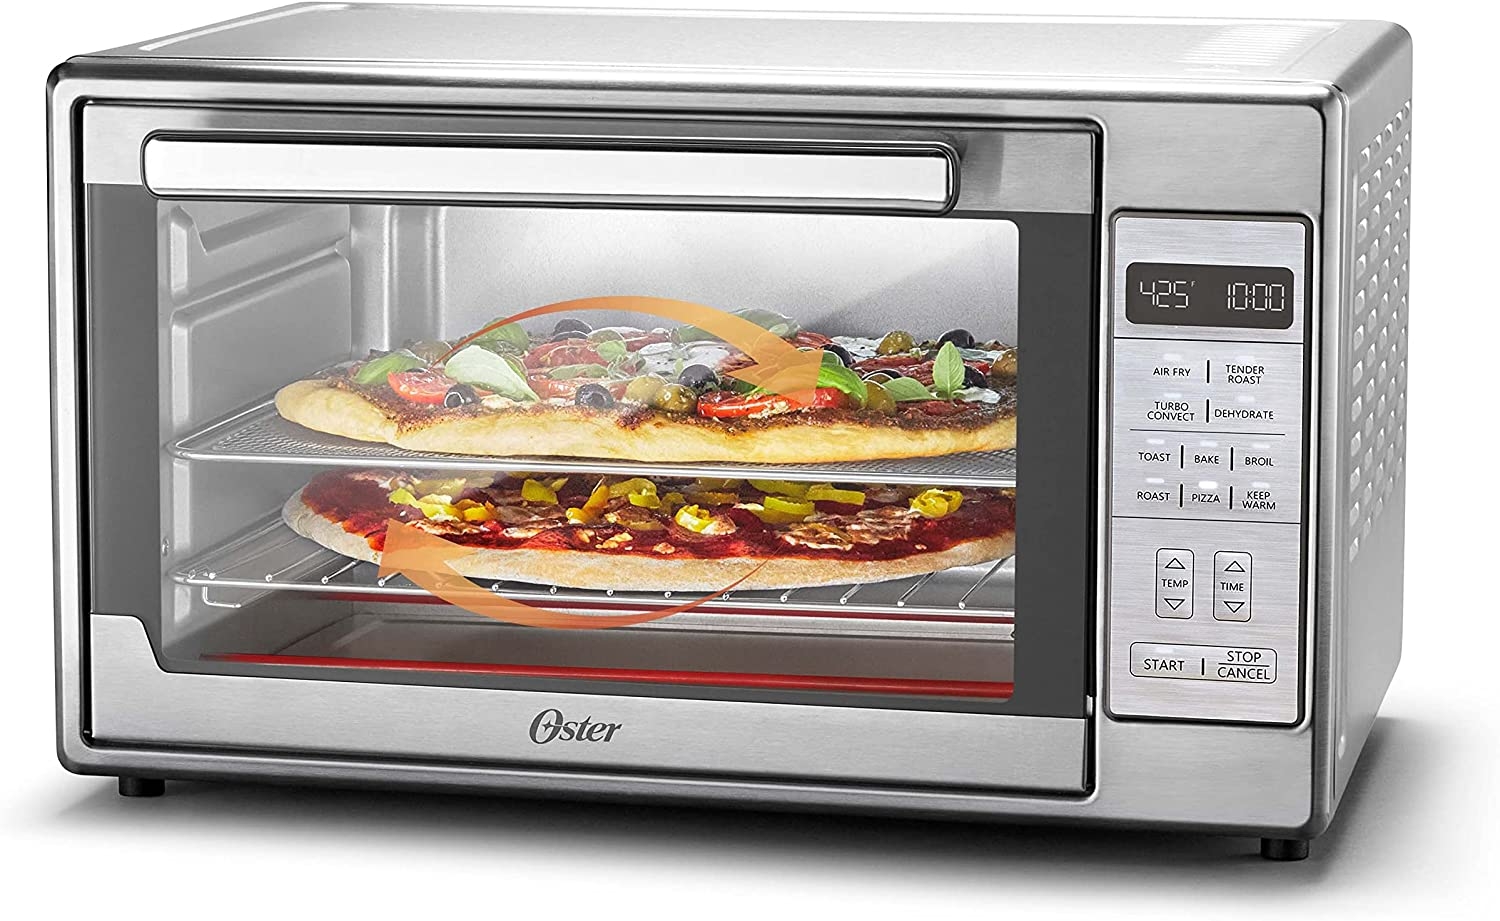 Oster Air Fryer Oven, 10-in-1 Countertop Toaster Oven Air Fryer Combo, 10.5″ x 13″ Fits 2 Large Pizzas, Stainless Steel Import